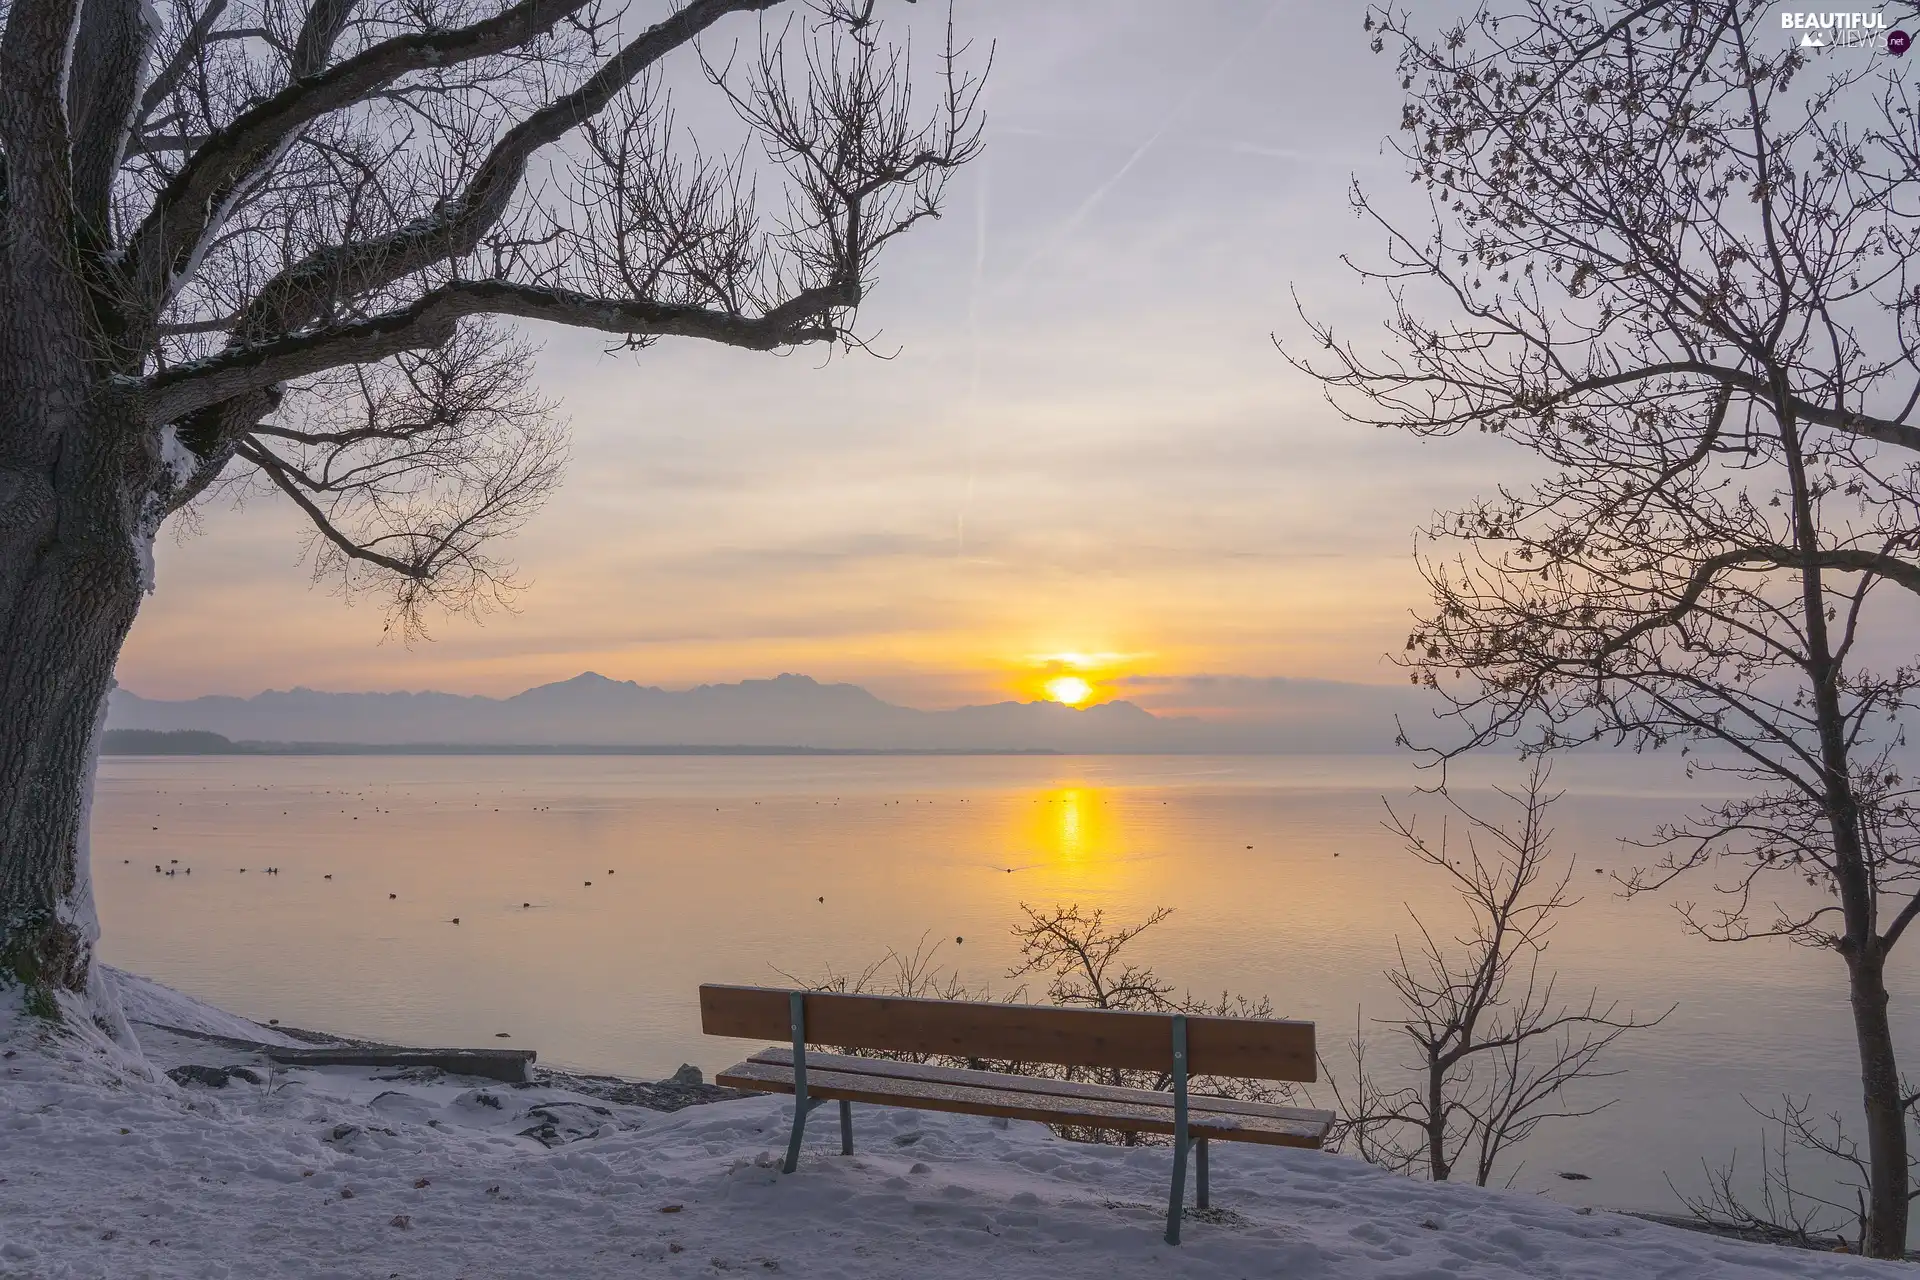 trees, Great Sunsets, Bench, lake, winter